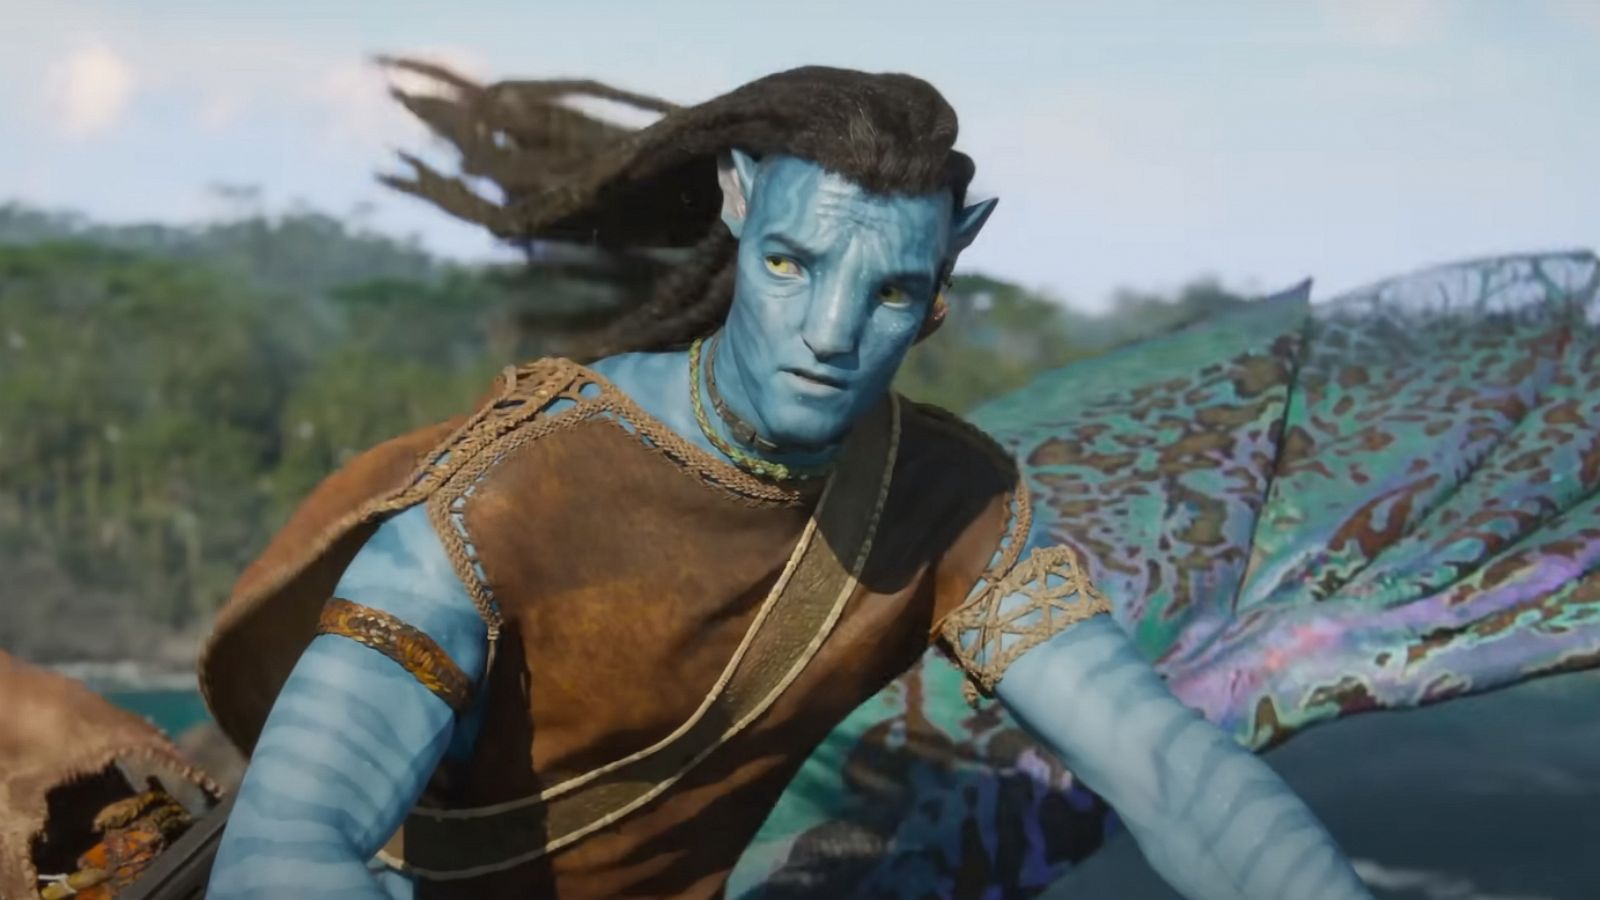 Avatar: The Way of Water': Details about the cast, plot and release date Morning America